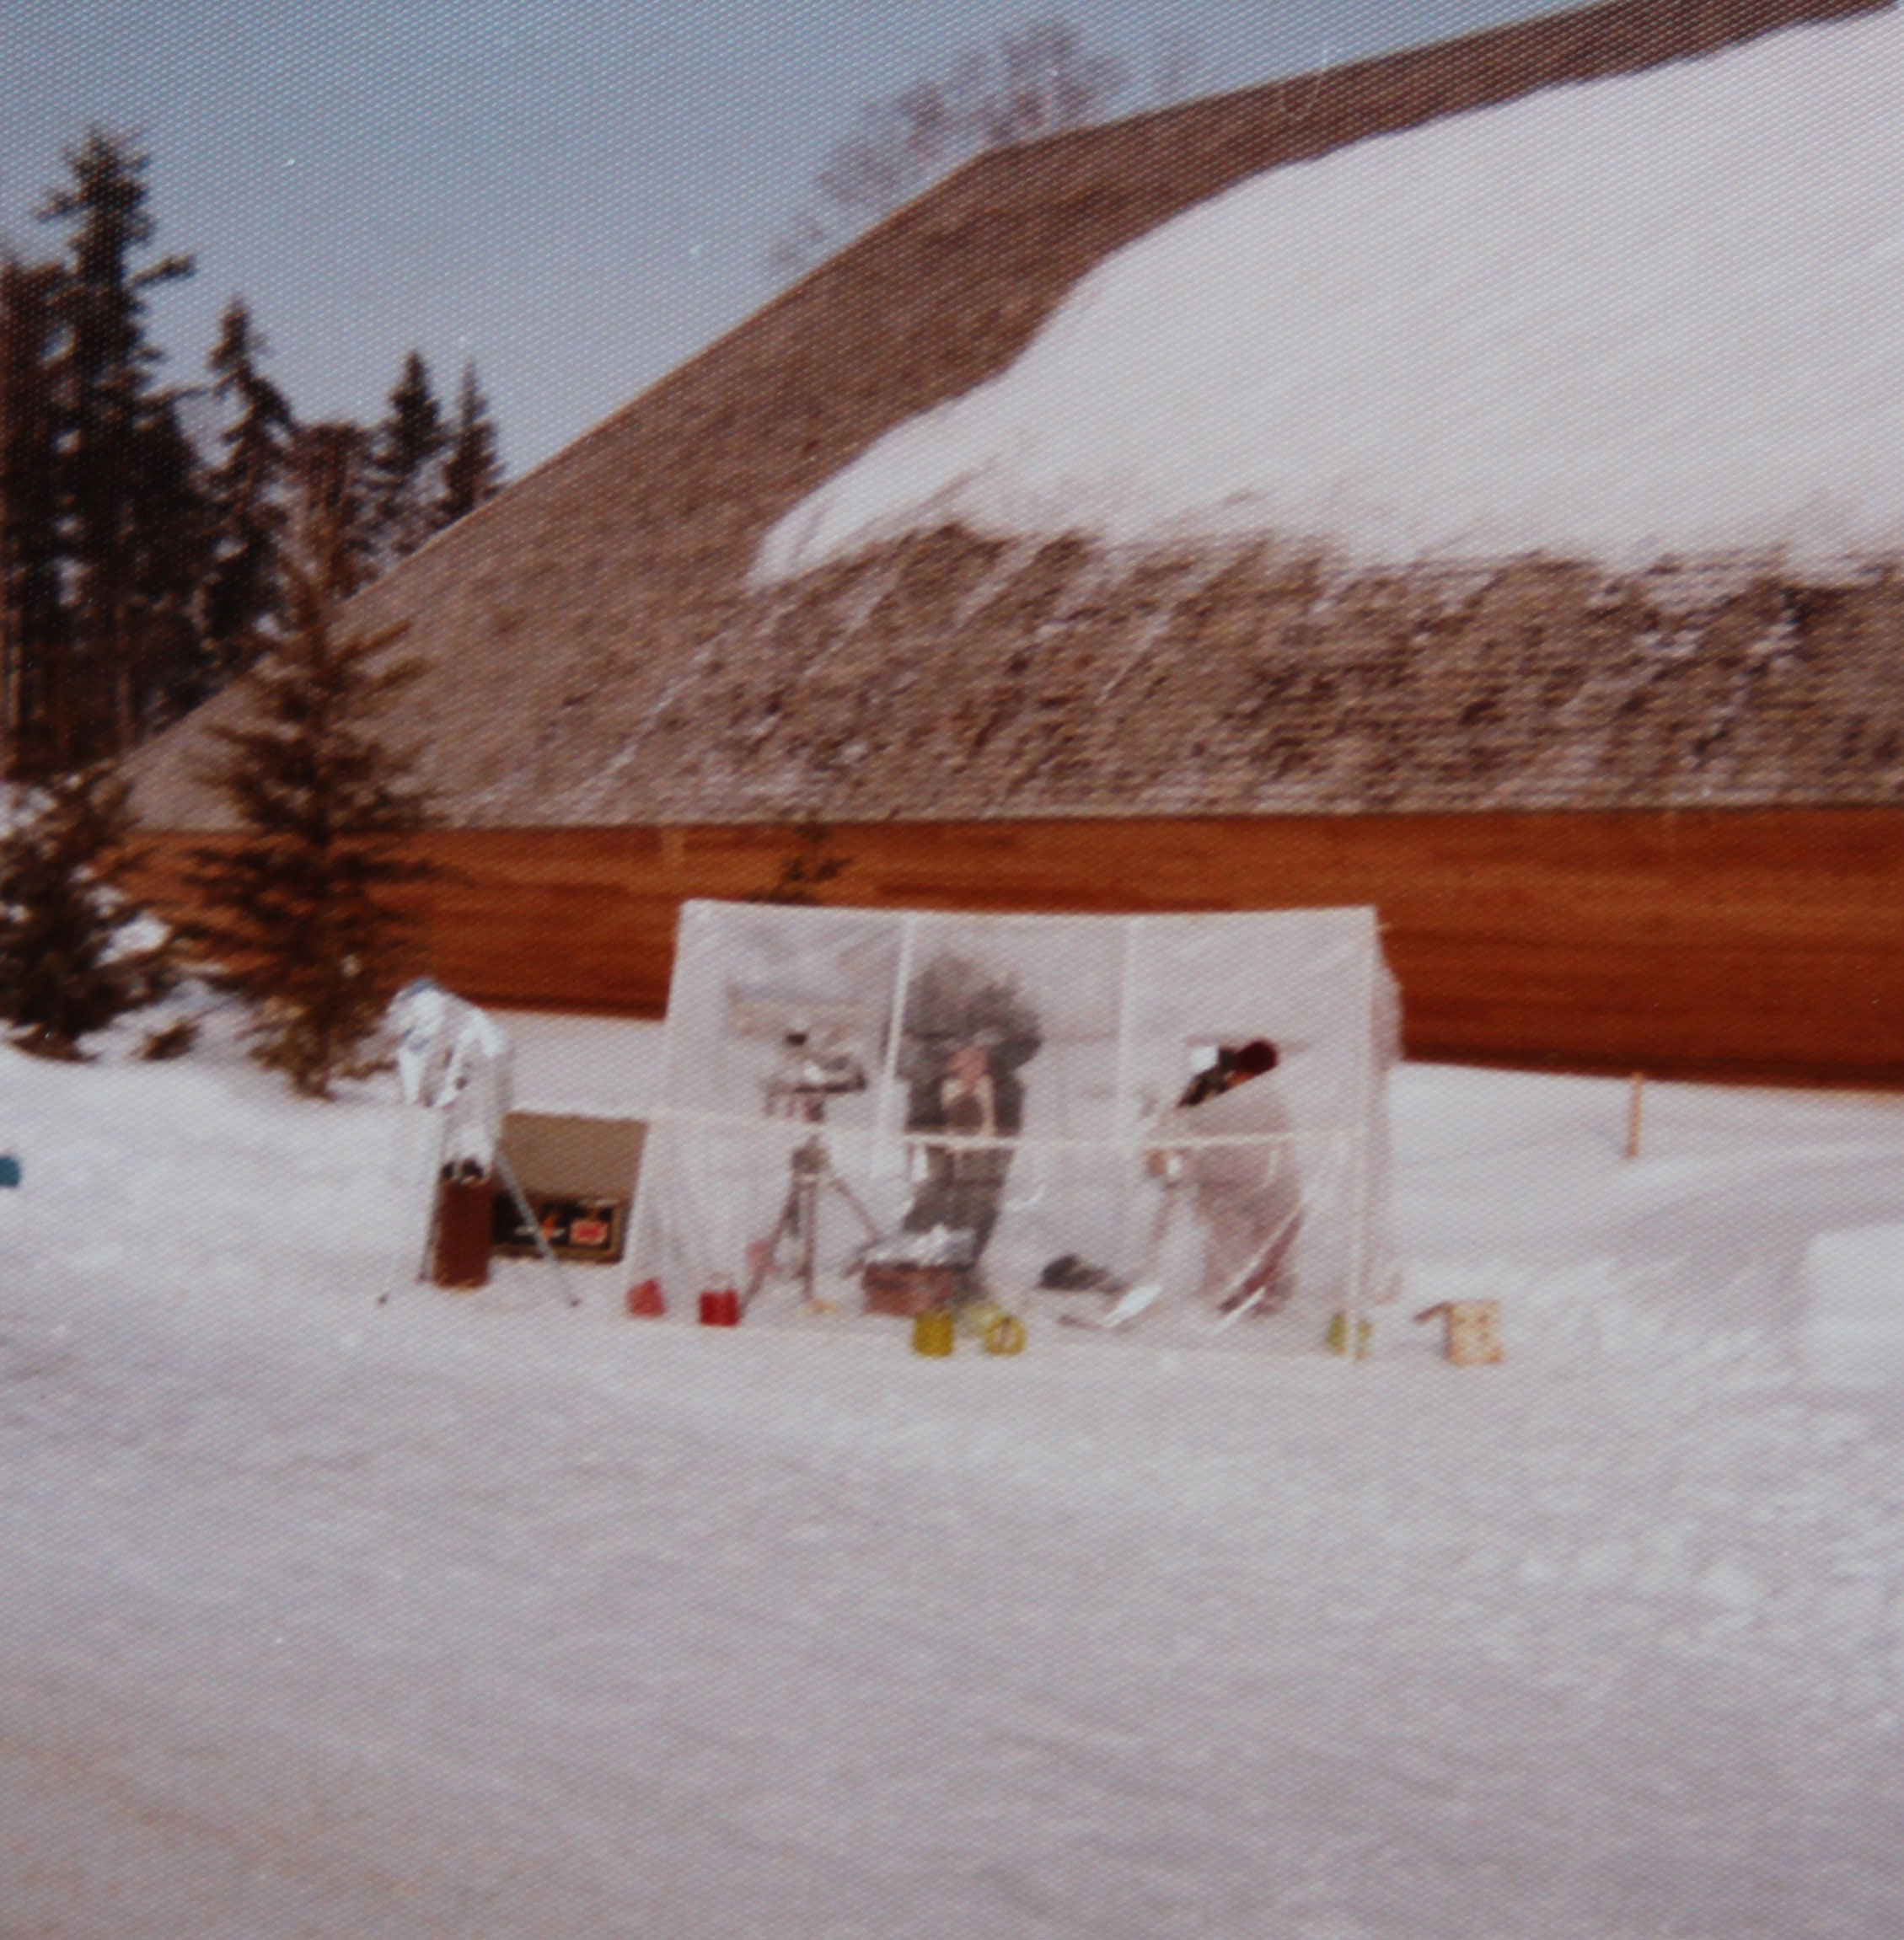 Some astronomers had set up wind breaks outside Hecla Resort for viewing the 1979 eclipse.